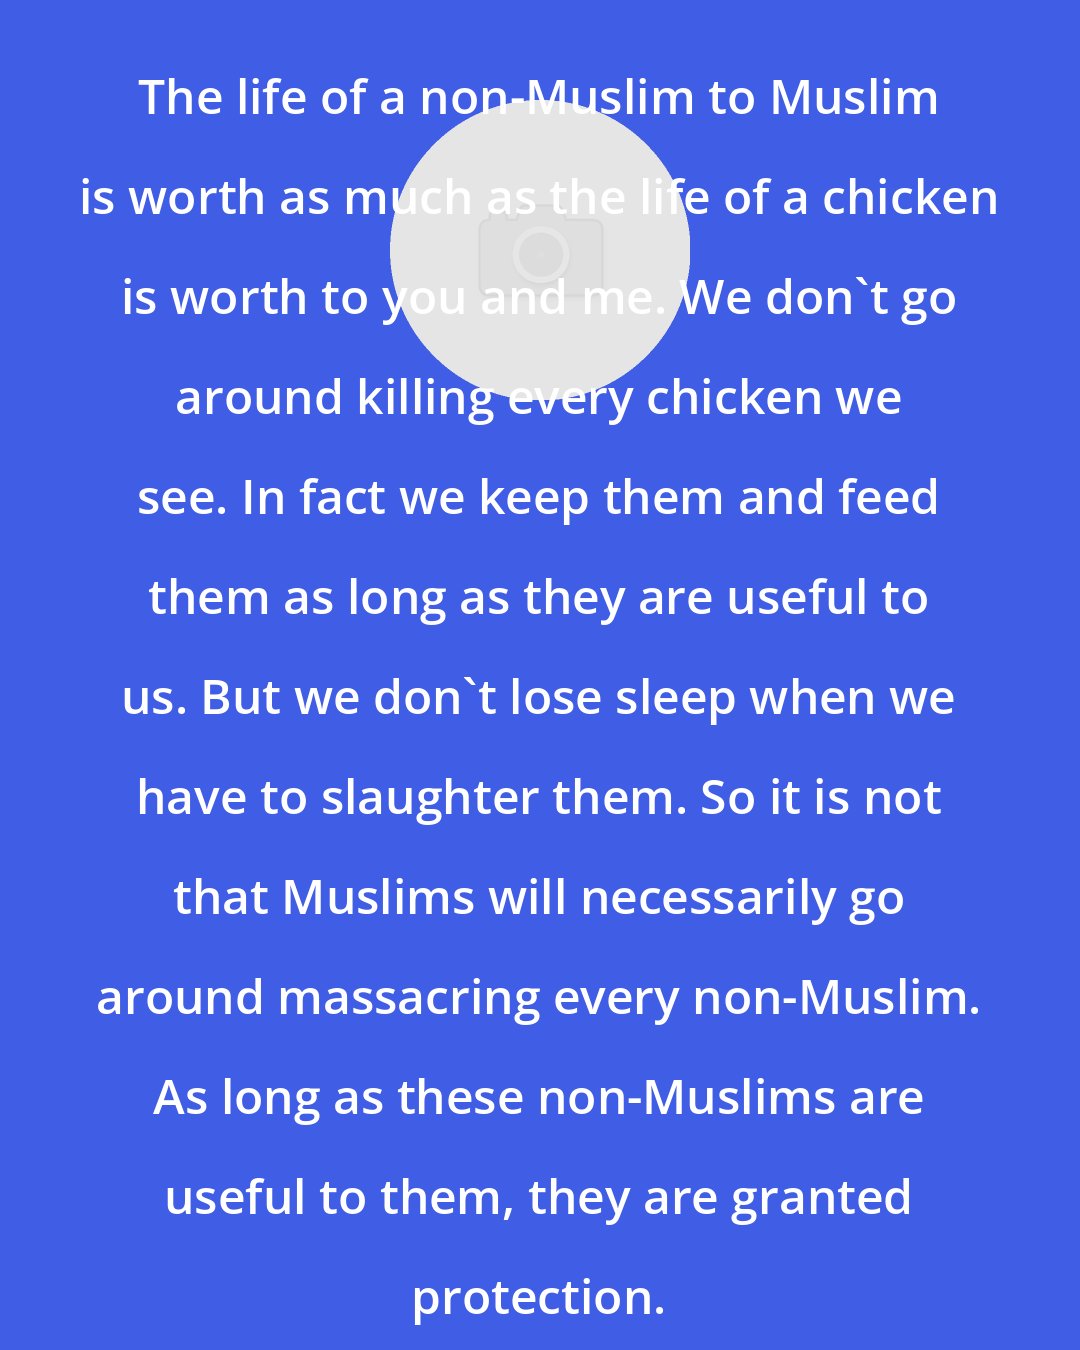 Ali Sina: The life of a non-Muslim to Muslim is worth as much as the life of a chicken is worth to you and me. We don't go around killing every chicken we see. In fact we keep them and feed them as long as they are useful to us. But we don't lose sleep when we have to slaughter them. So it is not that Muslims will necessarily go around massacring every non-Muslim. As long as these non-Muslims are useful to them, they are granted protection.